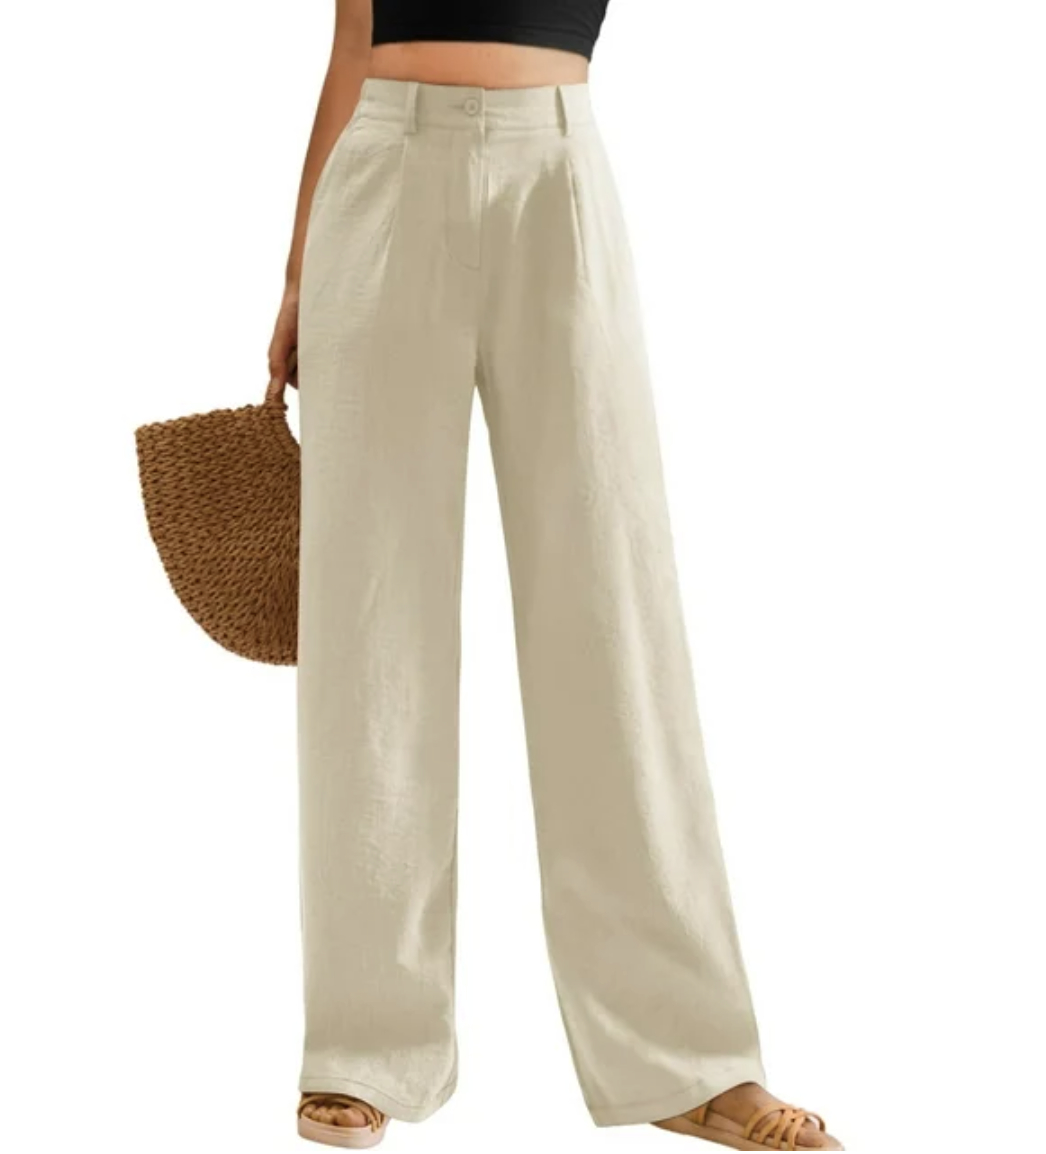 Model wearing wide-leg trousers with sandals, holding a woven bag